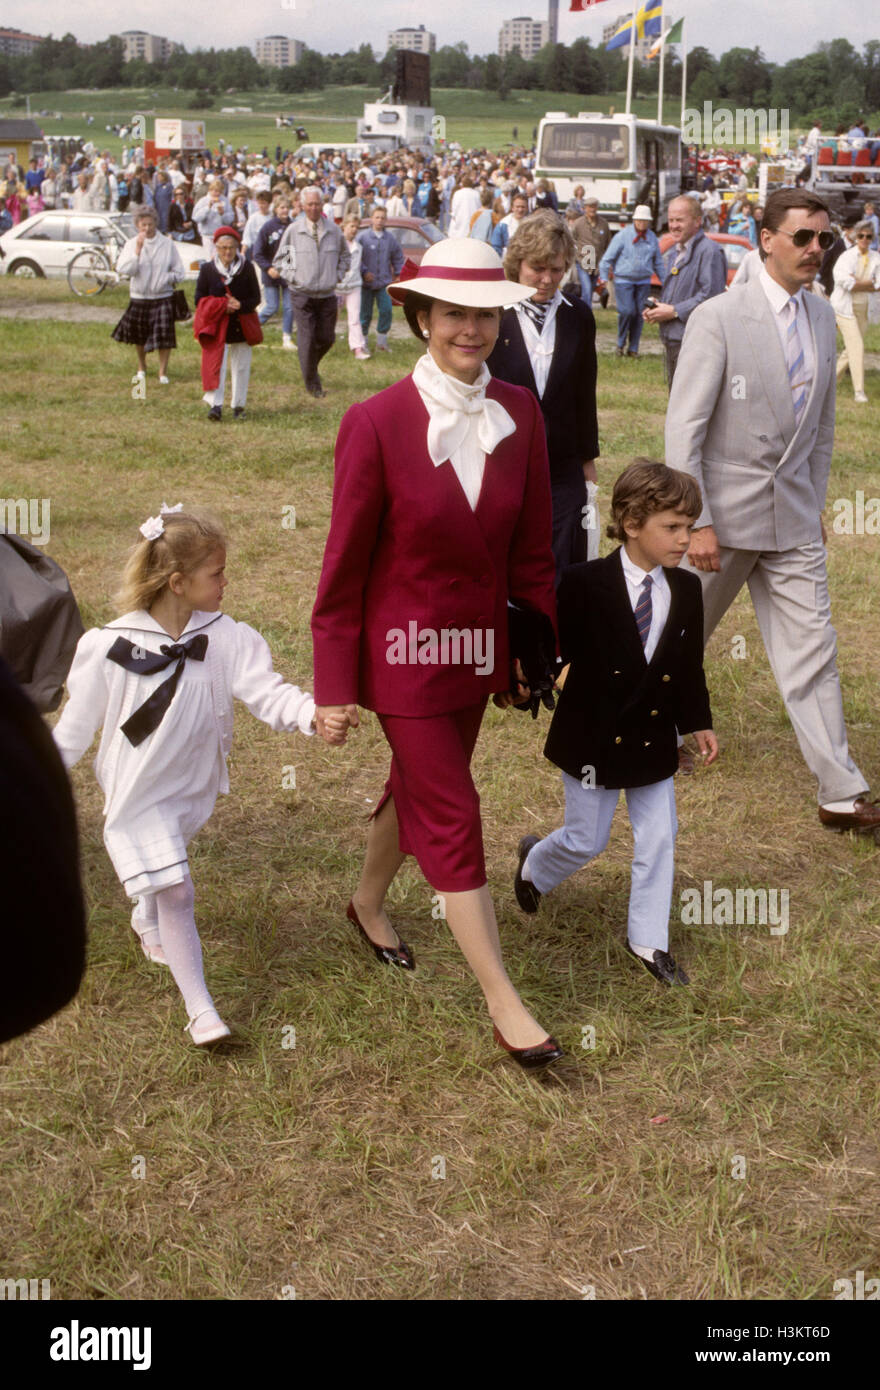 queen-silvia-with-princess-madeleine-and-prince-carl-philip-at-a-horse-H3KT6D.jpg